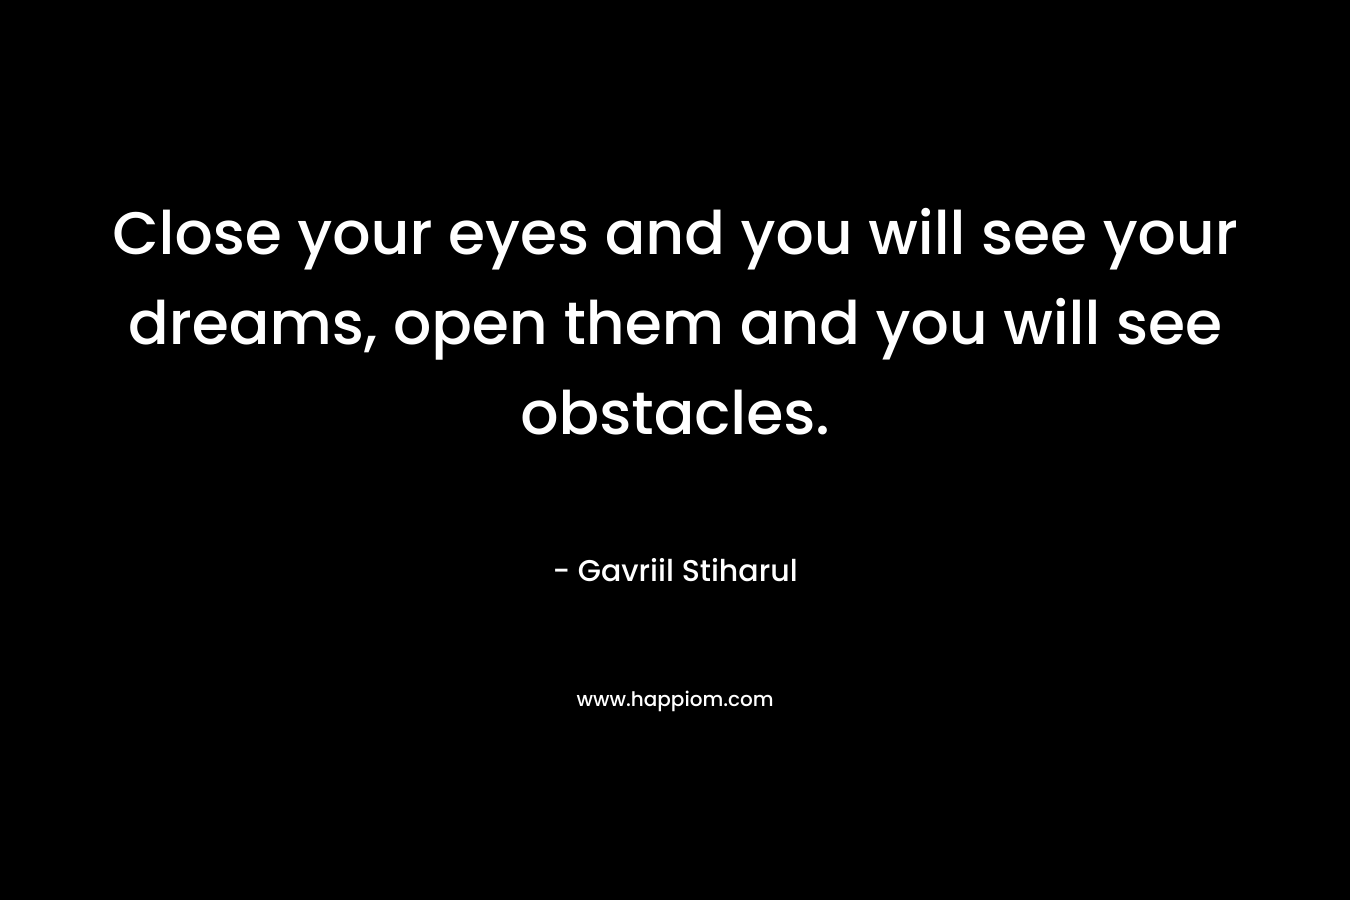 Close your eyes and you will see your dreams, open them and you will see obstacles. – Gavriil Stiharul